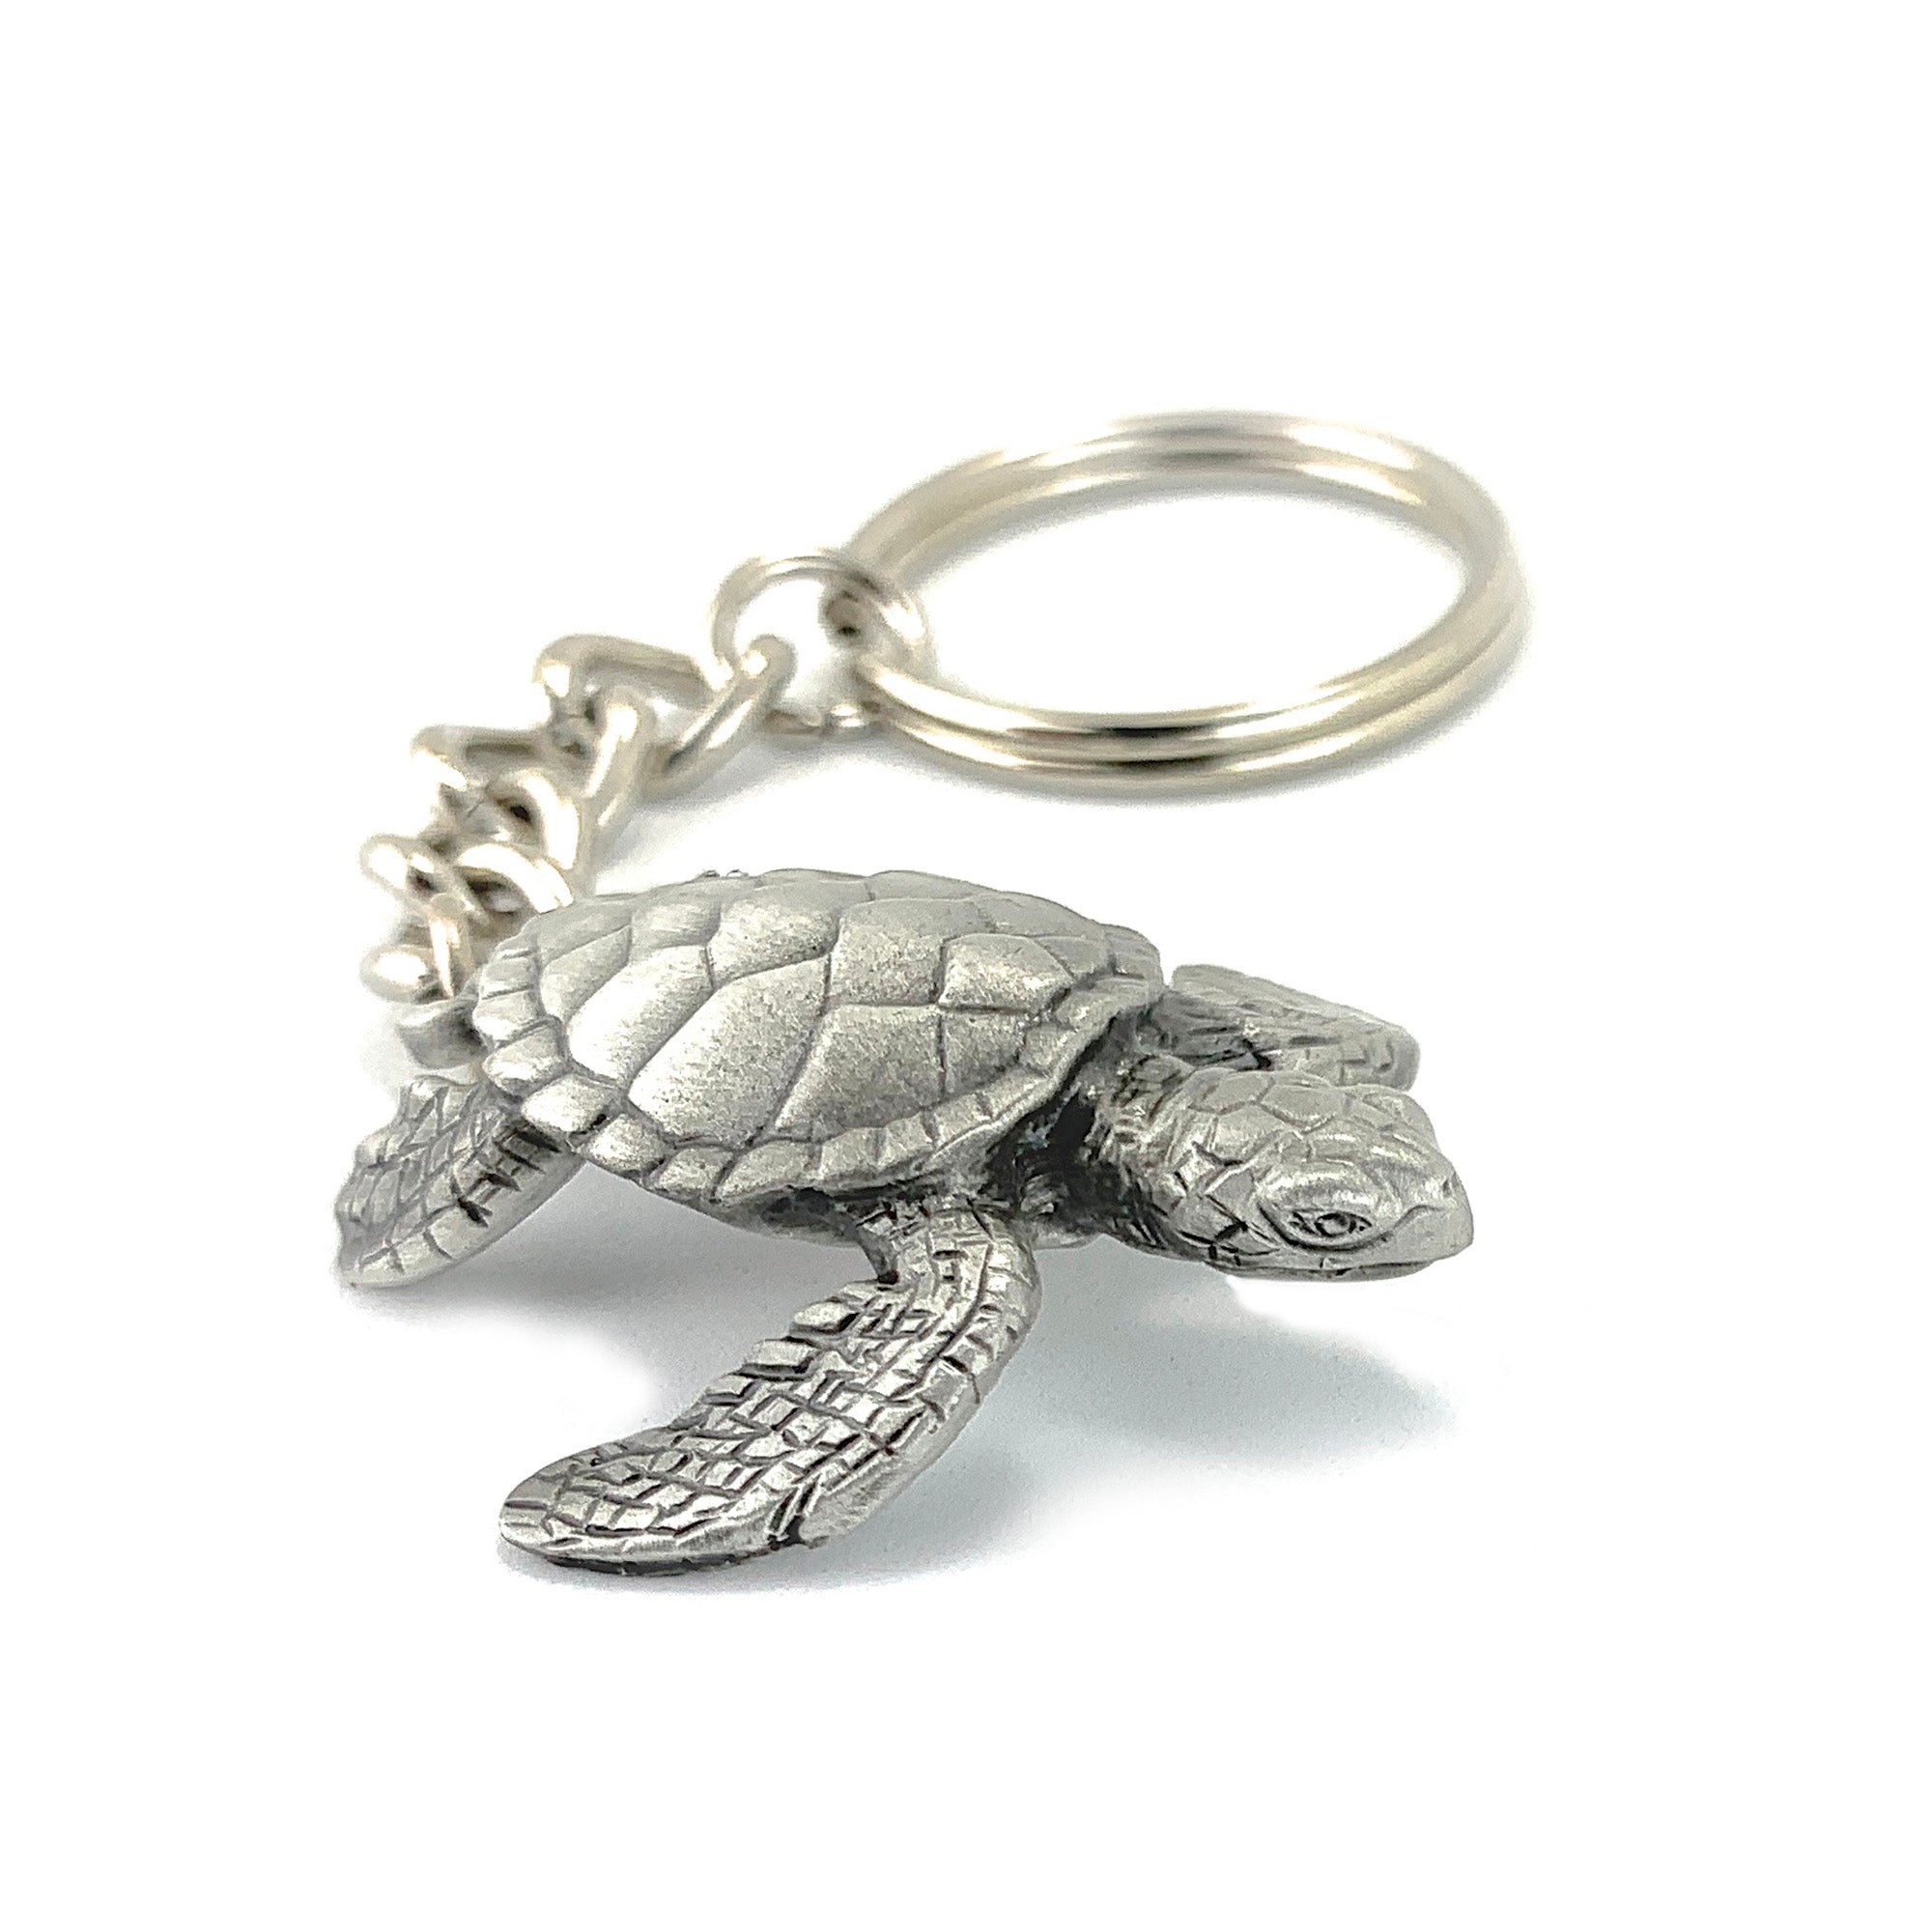 Big Blue by Roland Turtle Keychain for Men and Women- Sea Turtle Key Fob, Gift for Turtle lovers, Cute Turtle Keyring, Sea Life Key Chain, Scuba Gifts